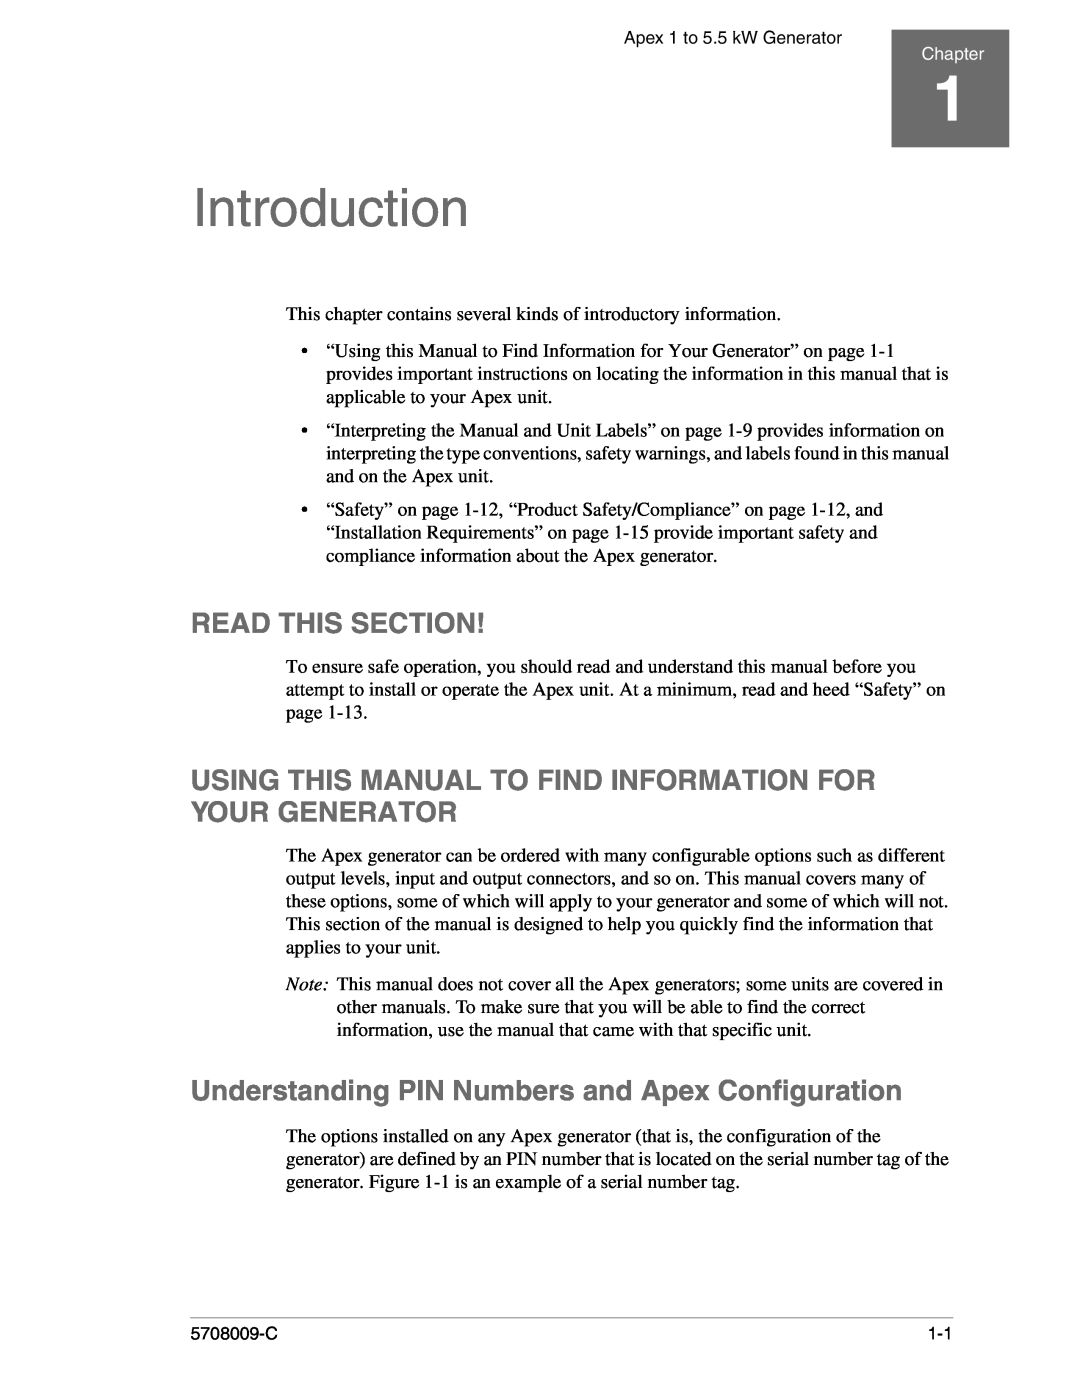 Apex Digital 5708009-C manual Introduction, Read This Section, Using This Manual To Find Information For Your Generator 